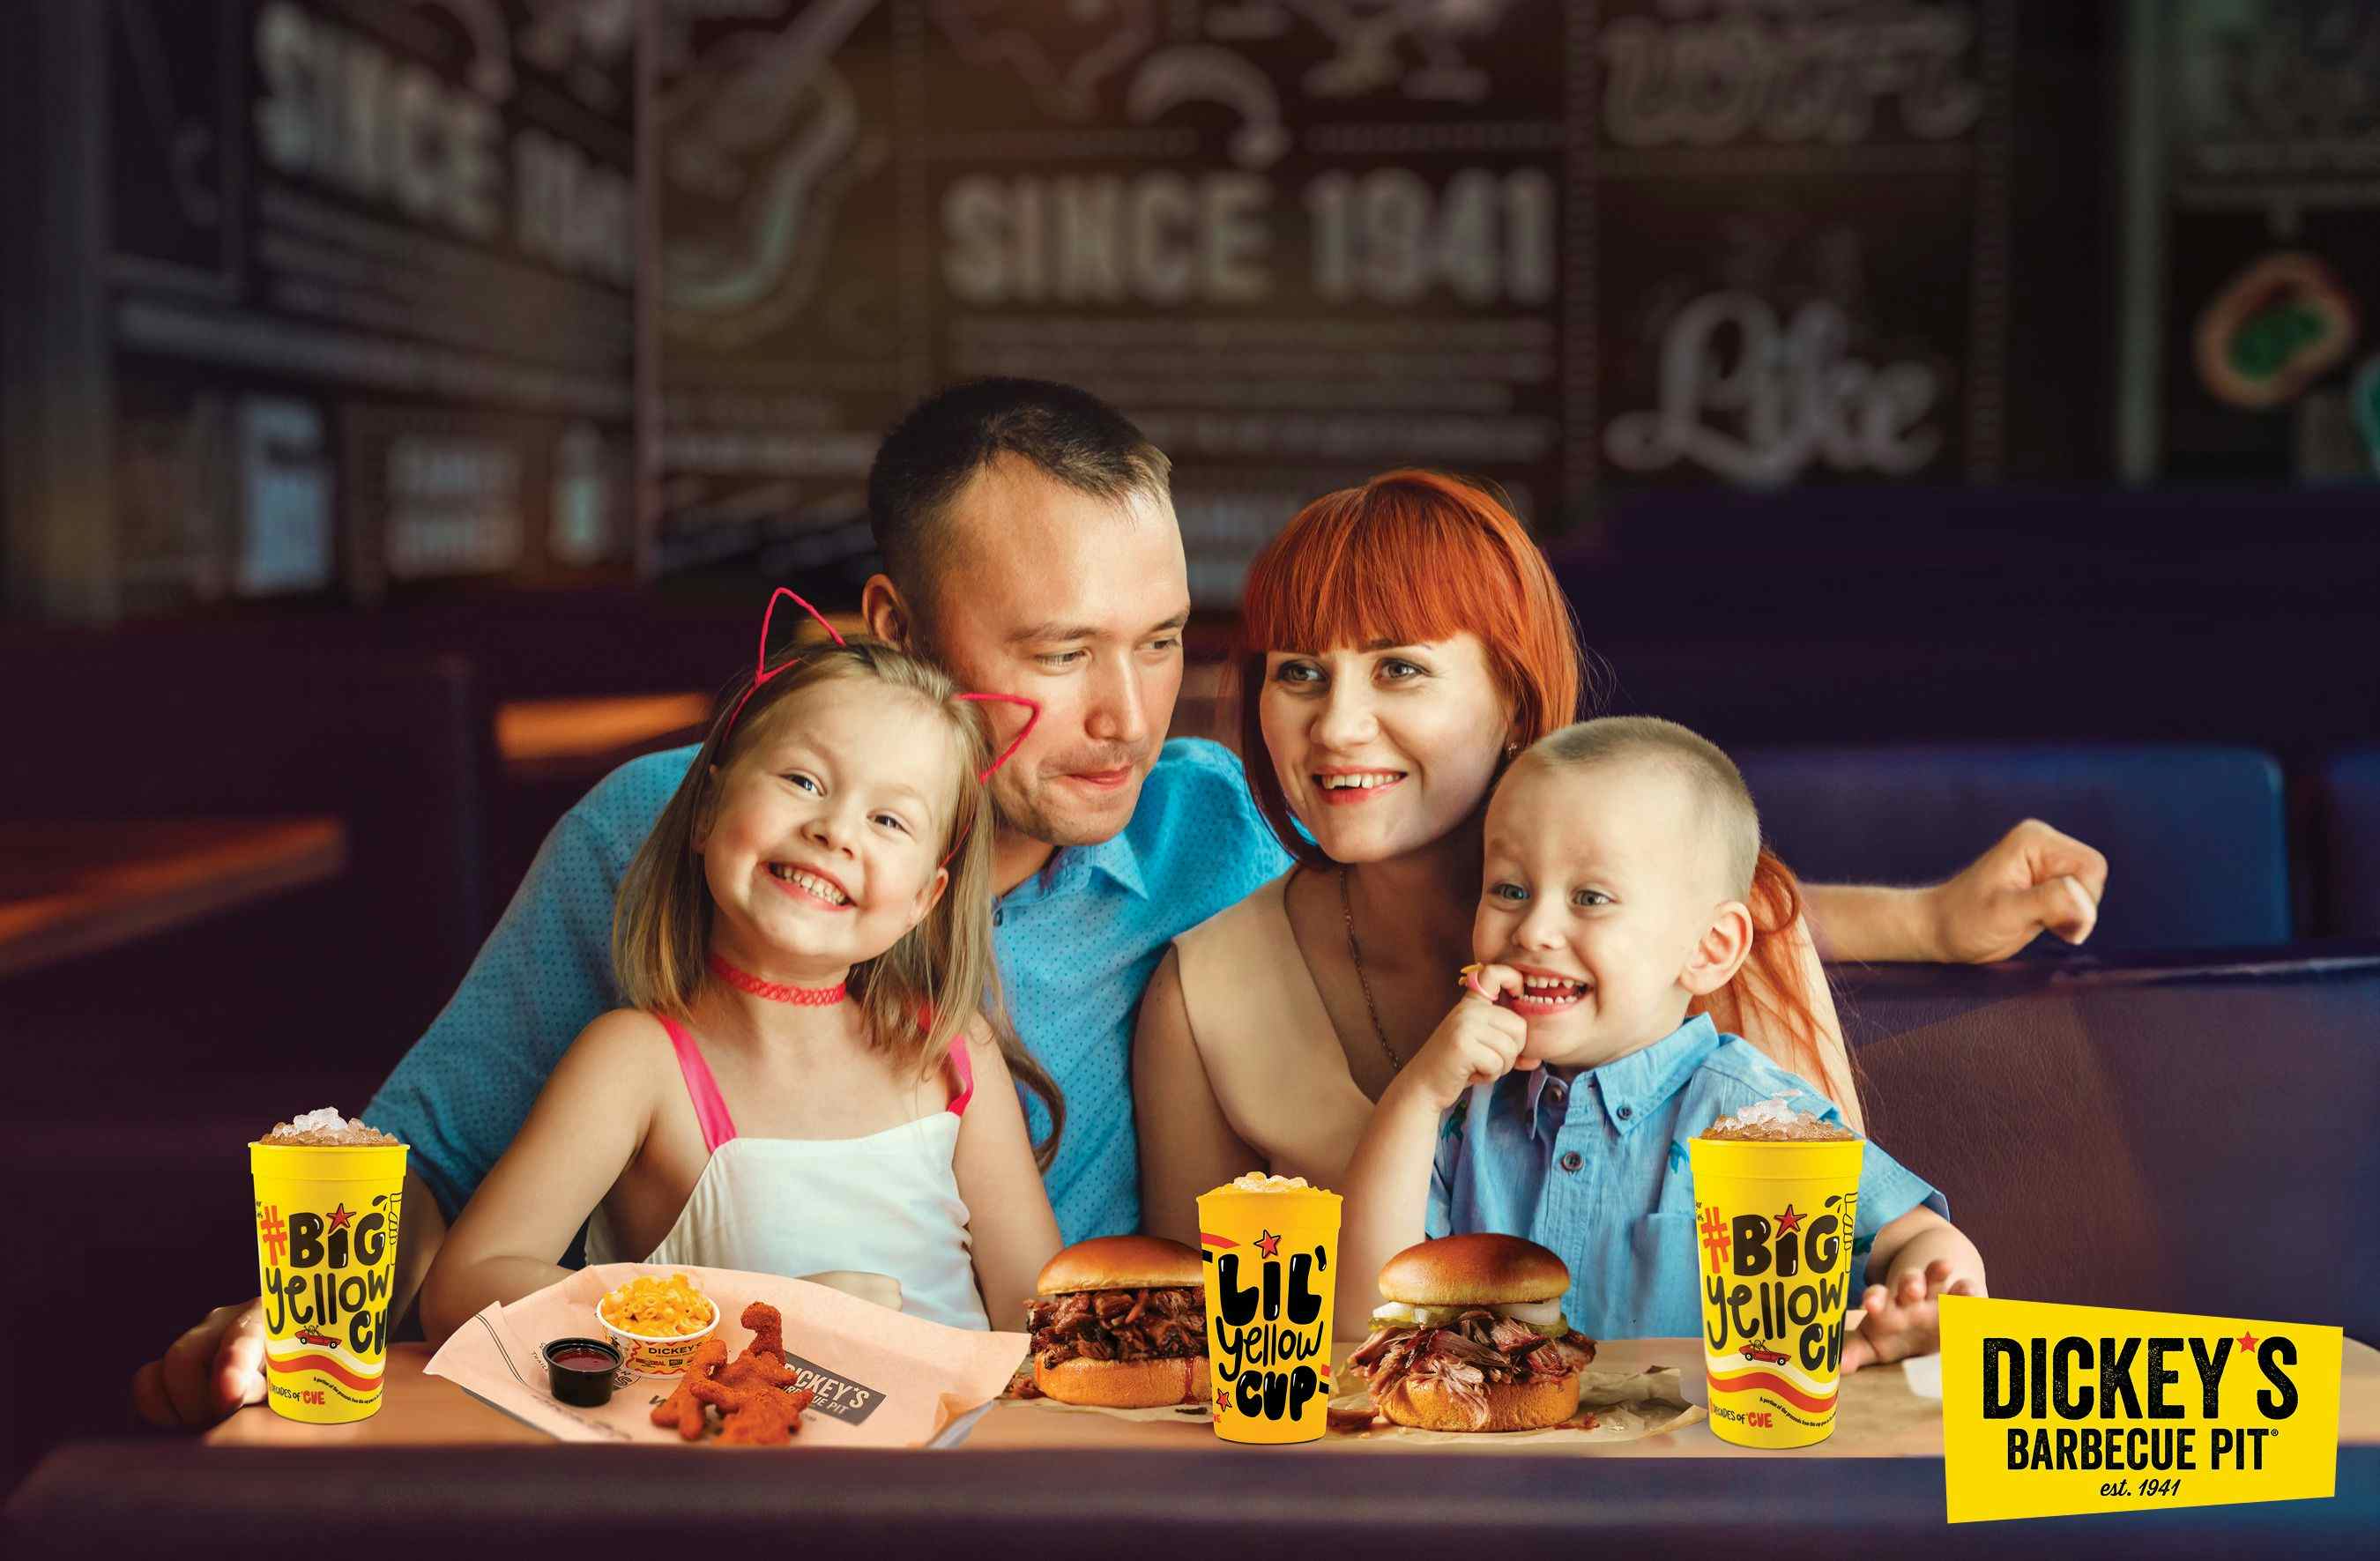 Celebrate Father’s Day with Dickey’s Barbecue Pit